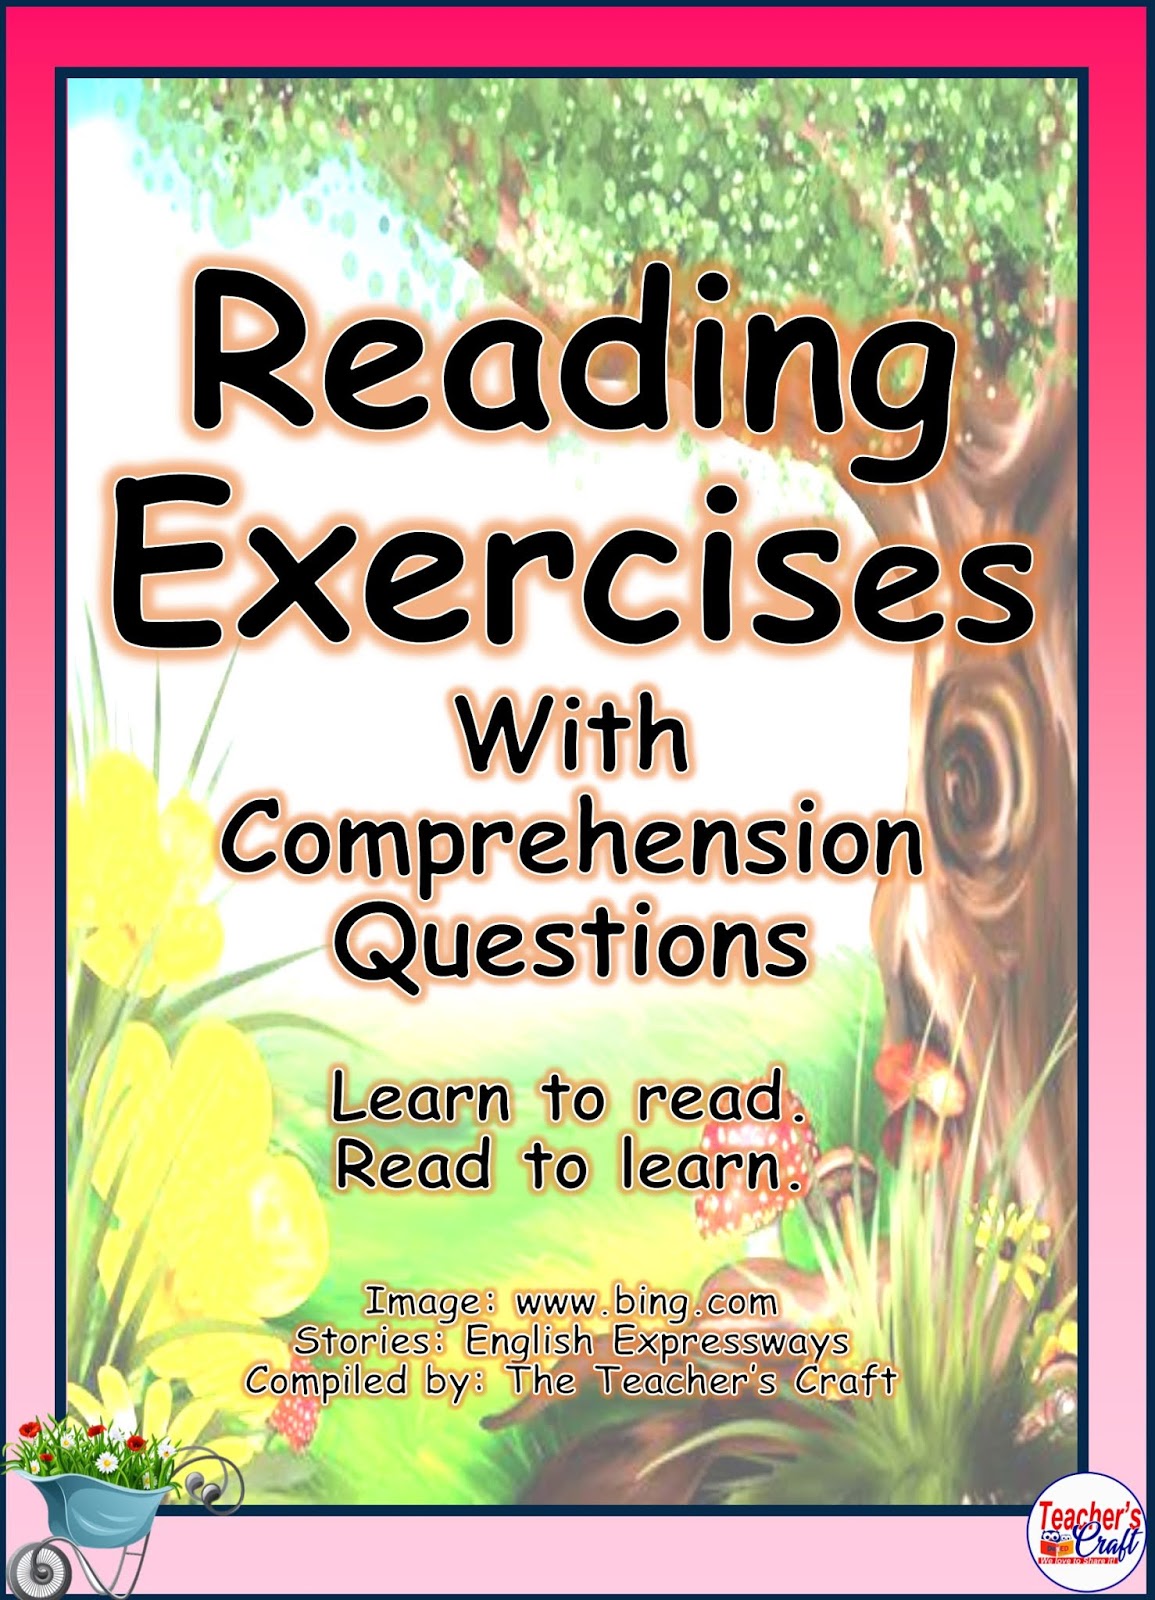 English Remedial Reading Exercises With Comprehension Questions The Teacher s Craft